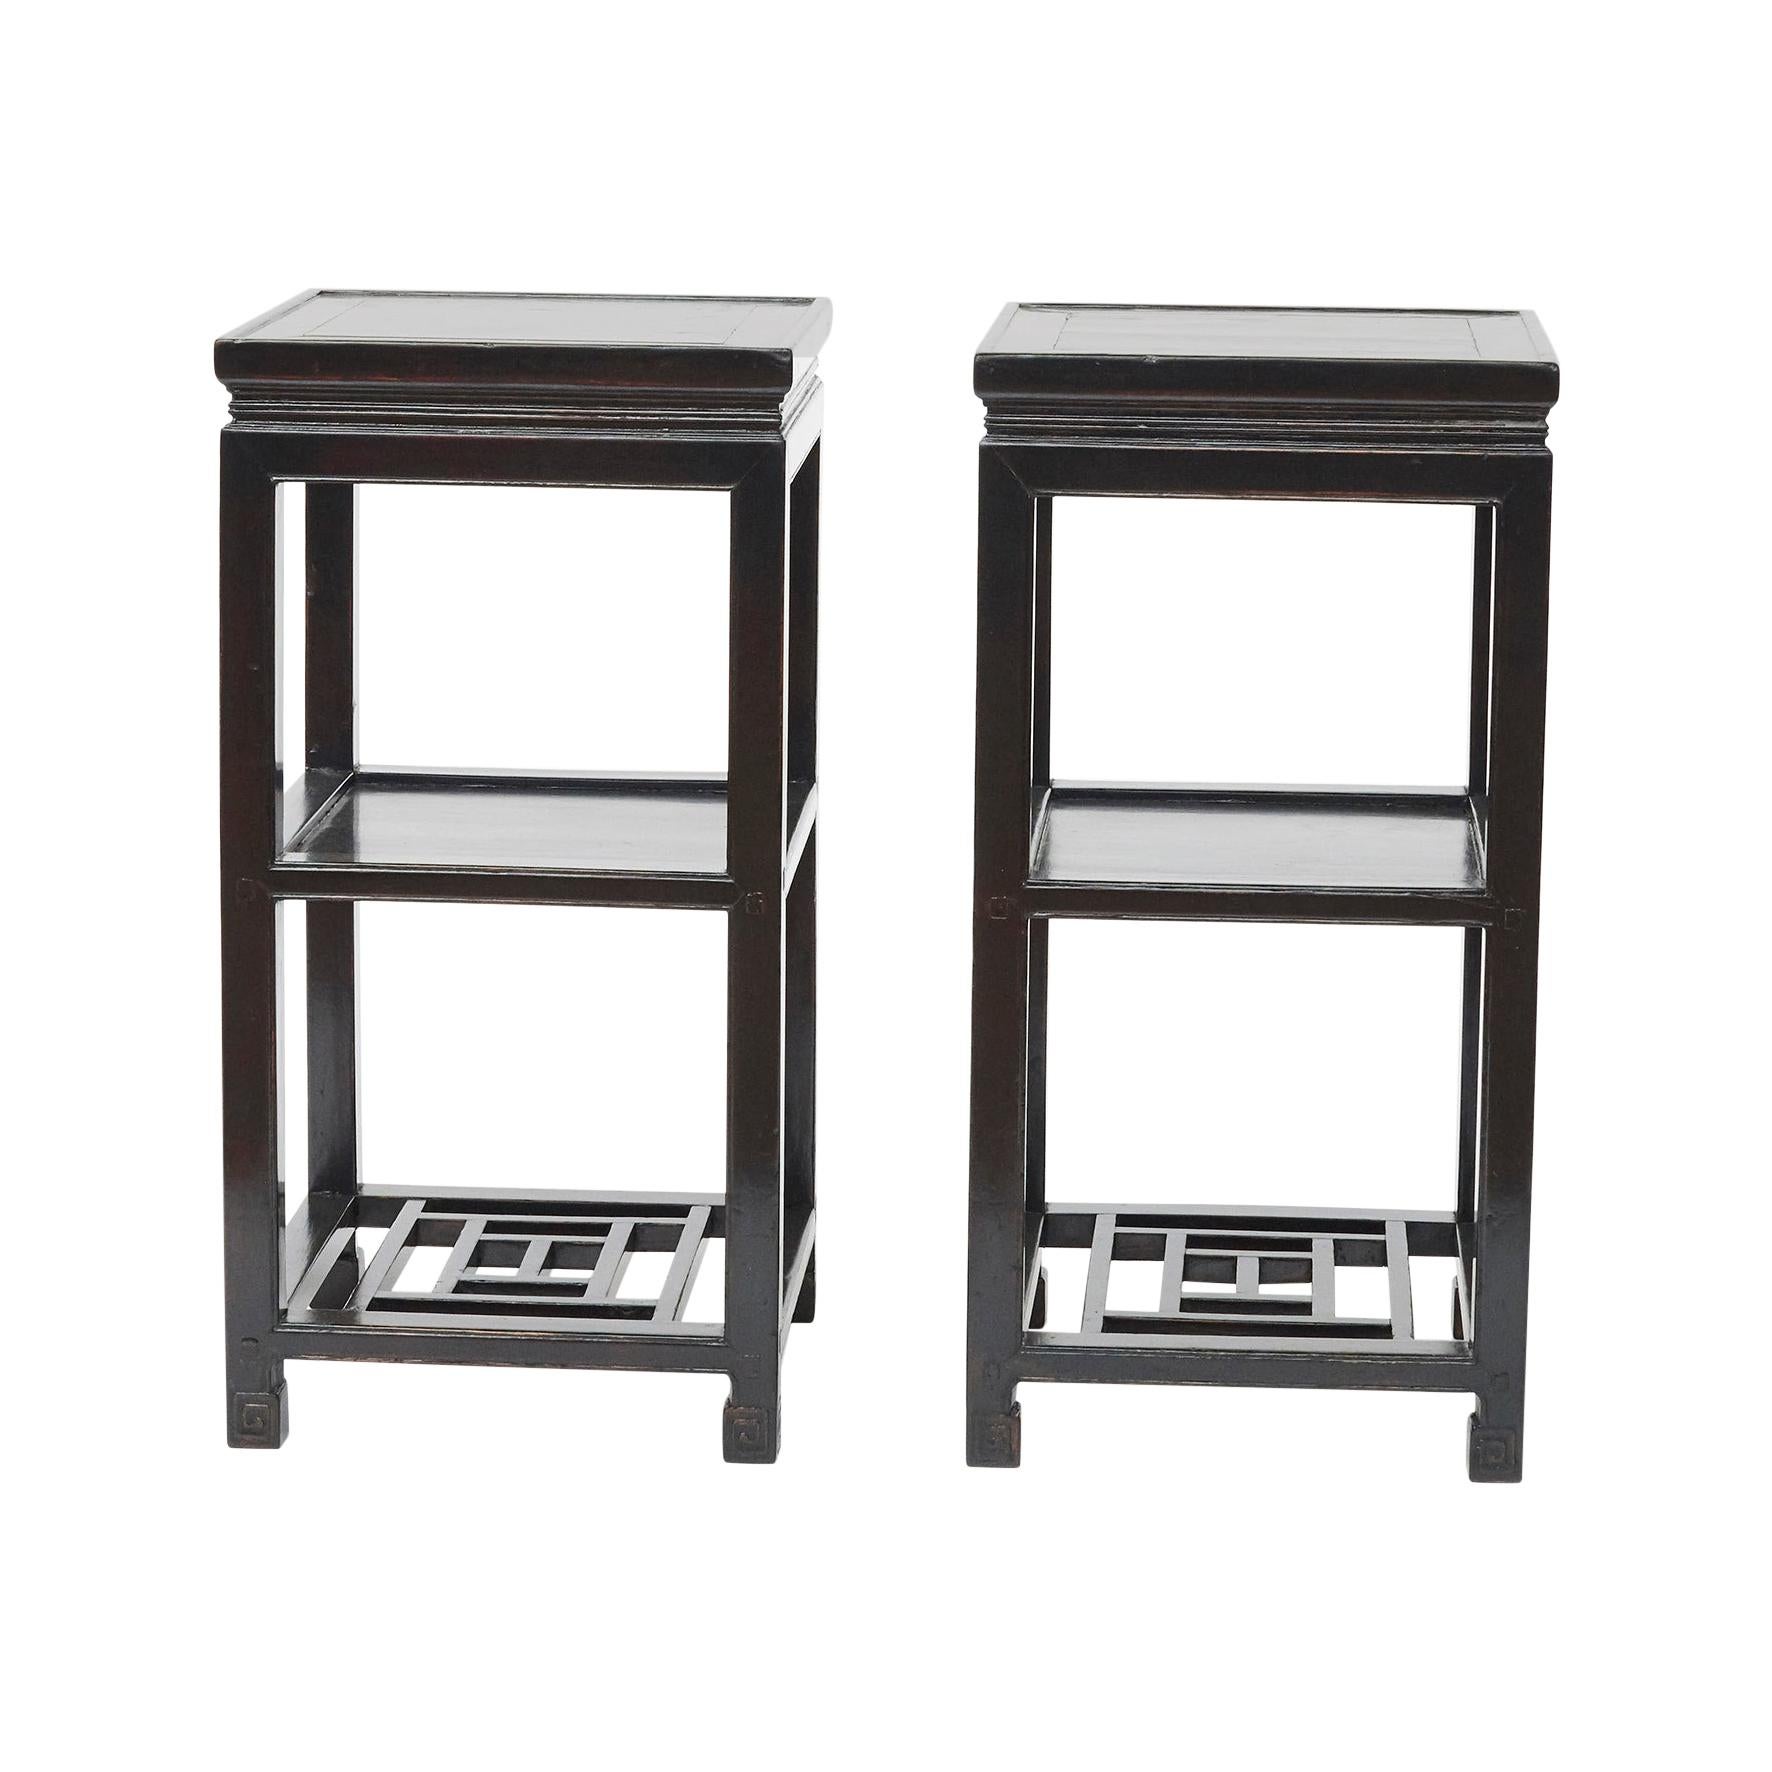 Pair of Square Black Lacquer End or Side Tables with Shelves, Beijing, 1910-1920